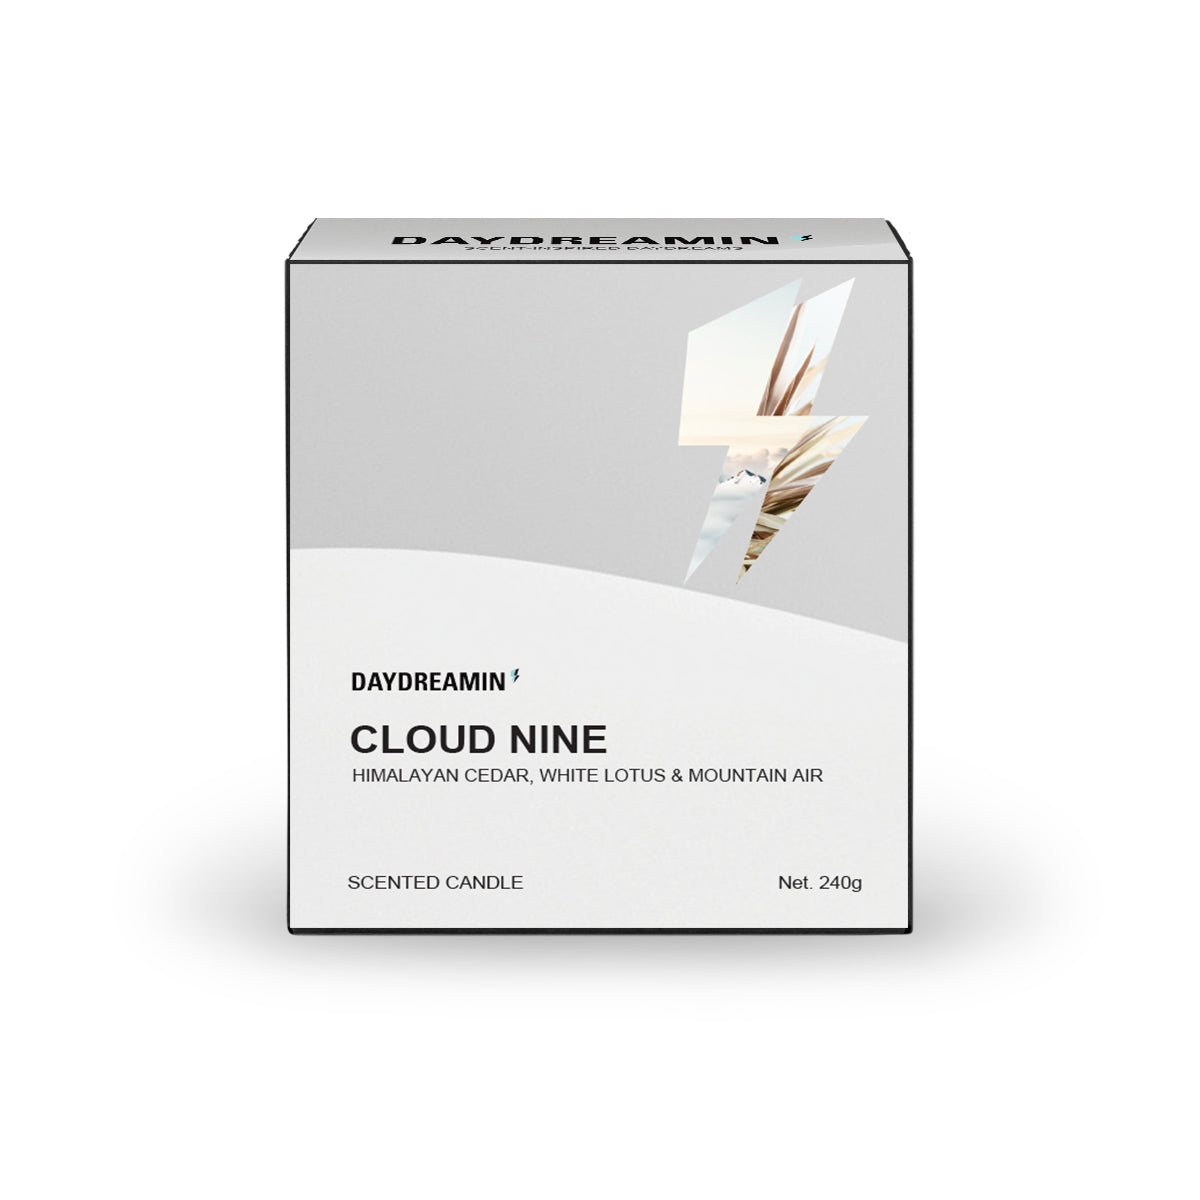 Daydreamin_Cloud Nine 9_Scented Candle UK_Gift Box